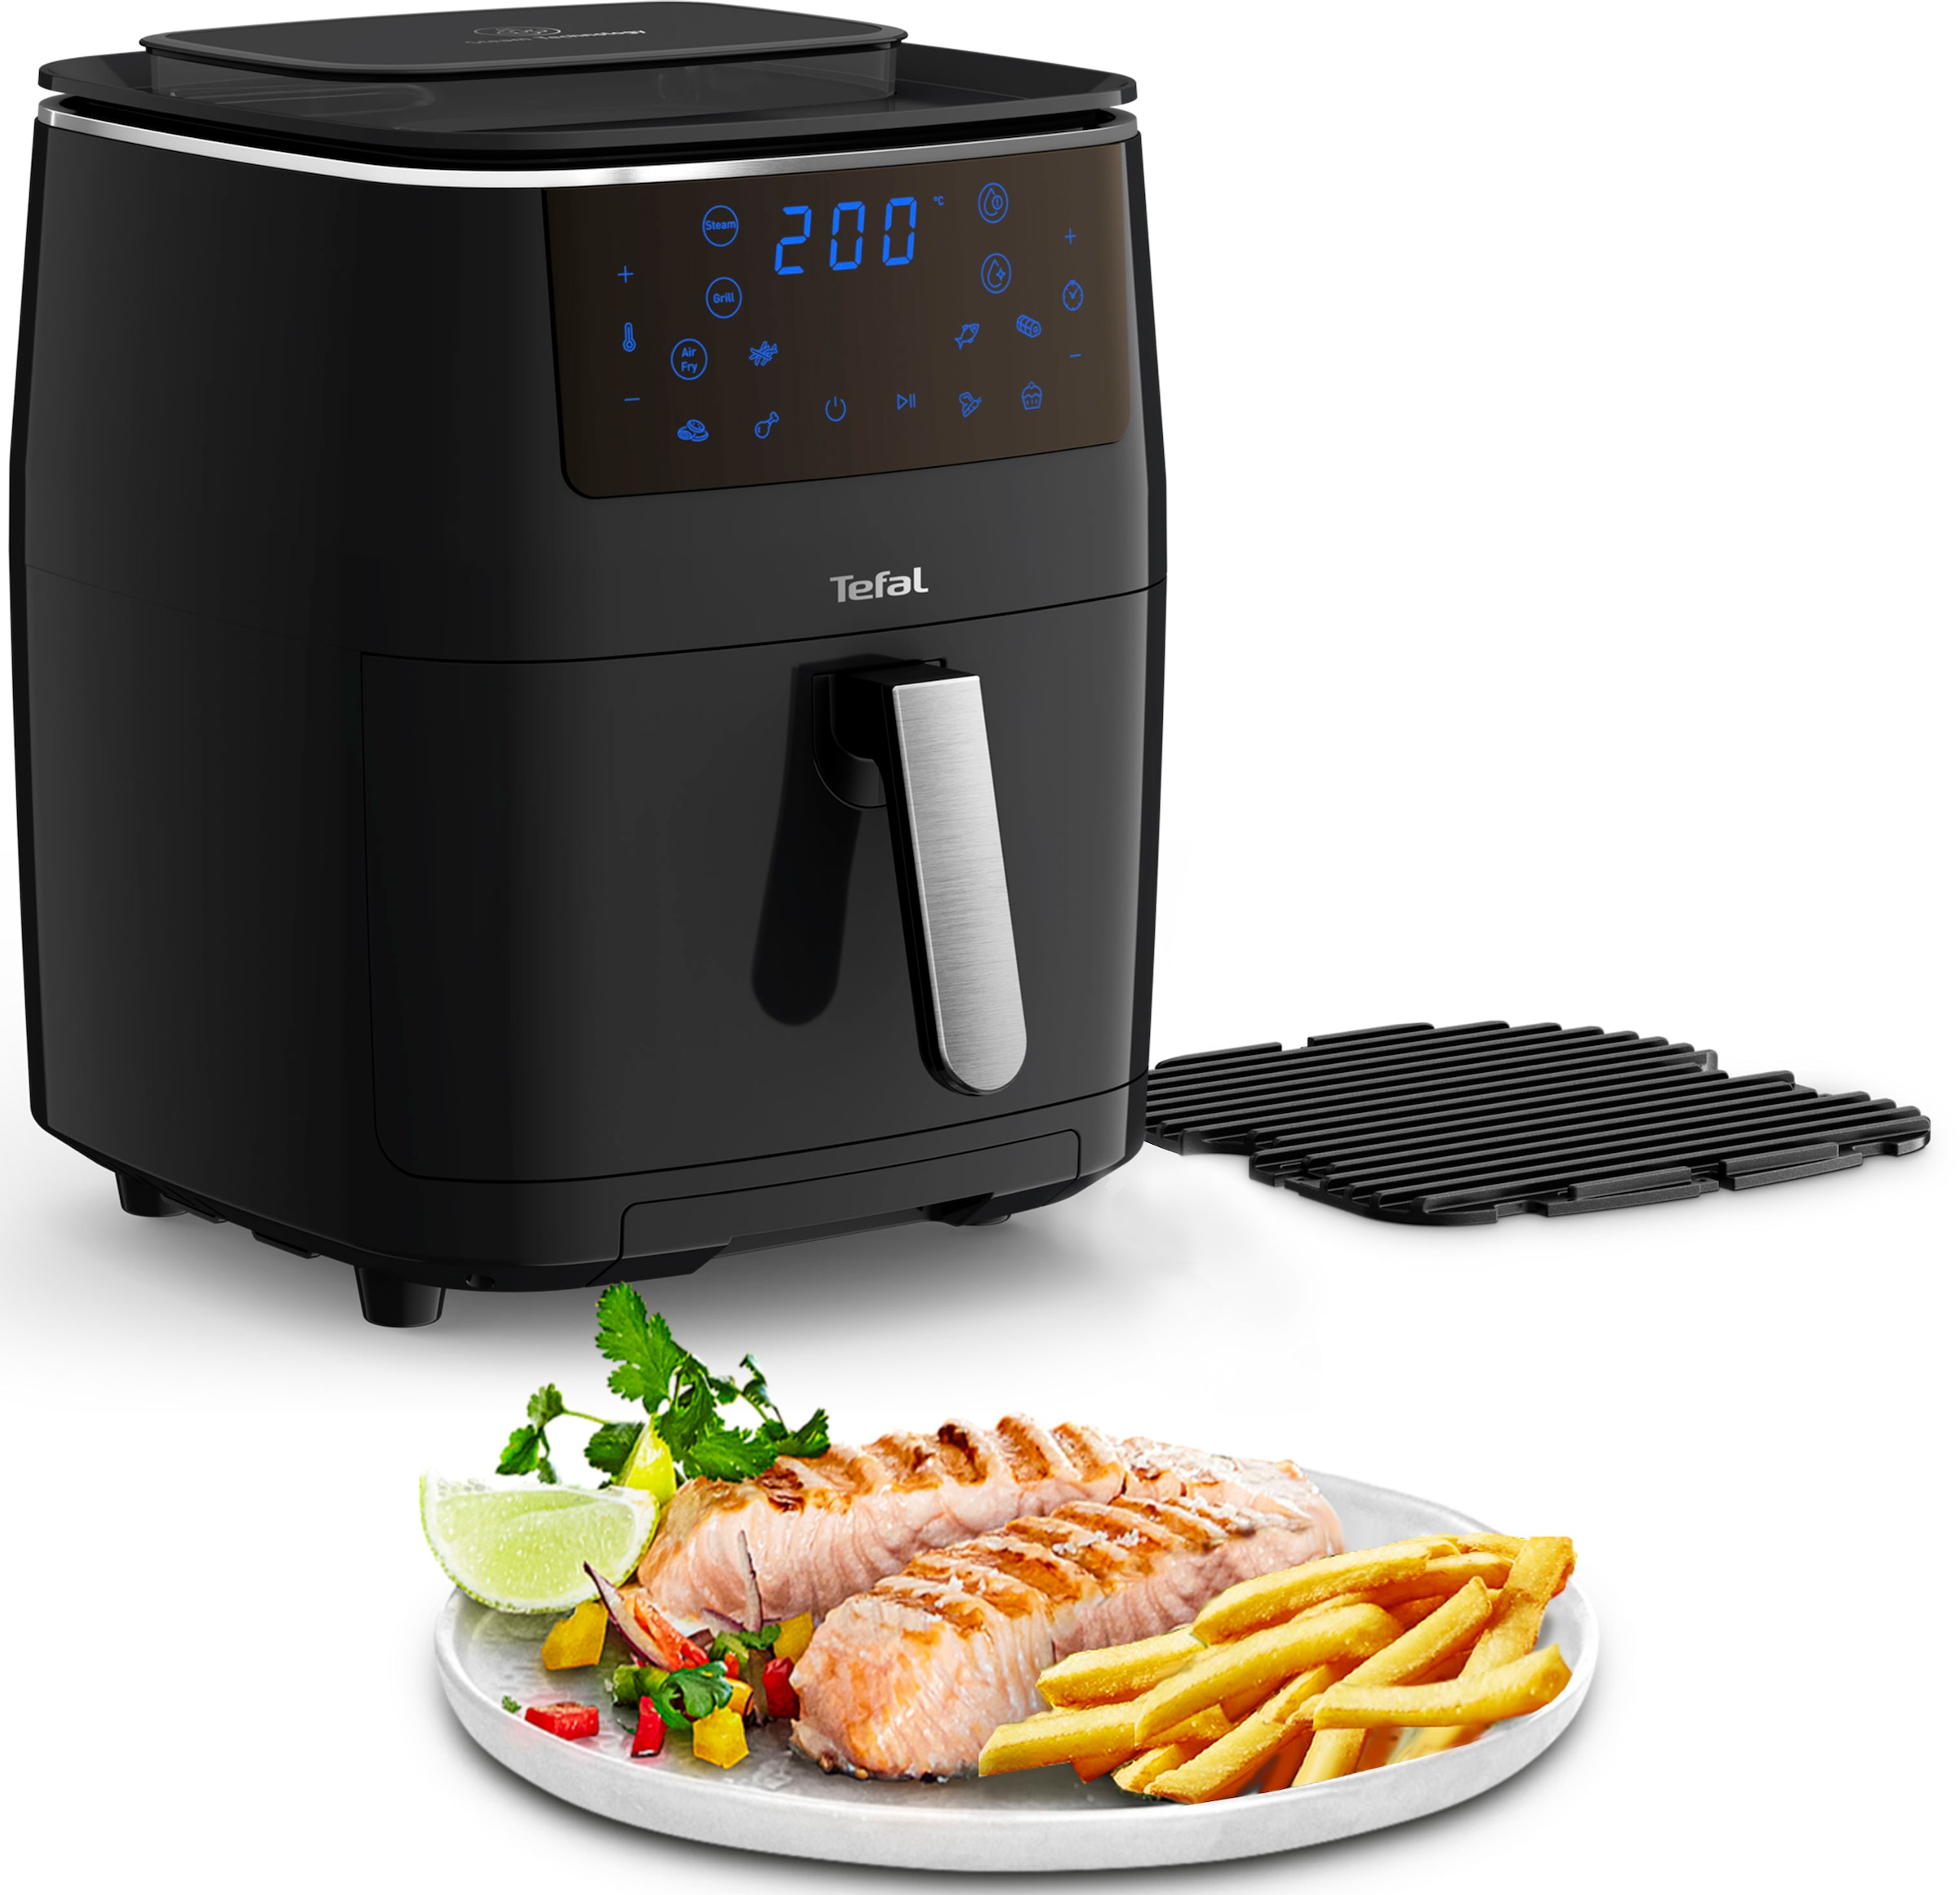 Heißluftfritteuse »FW2018 Easy Fry Grill & Steam«, 1700 W, Grill + Dampfgarer, 7...